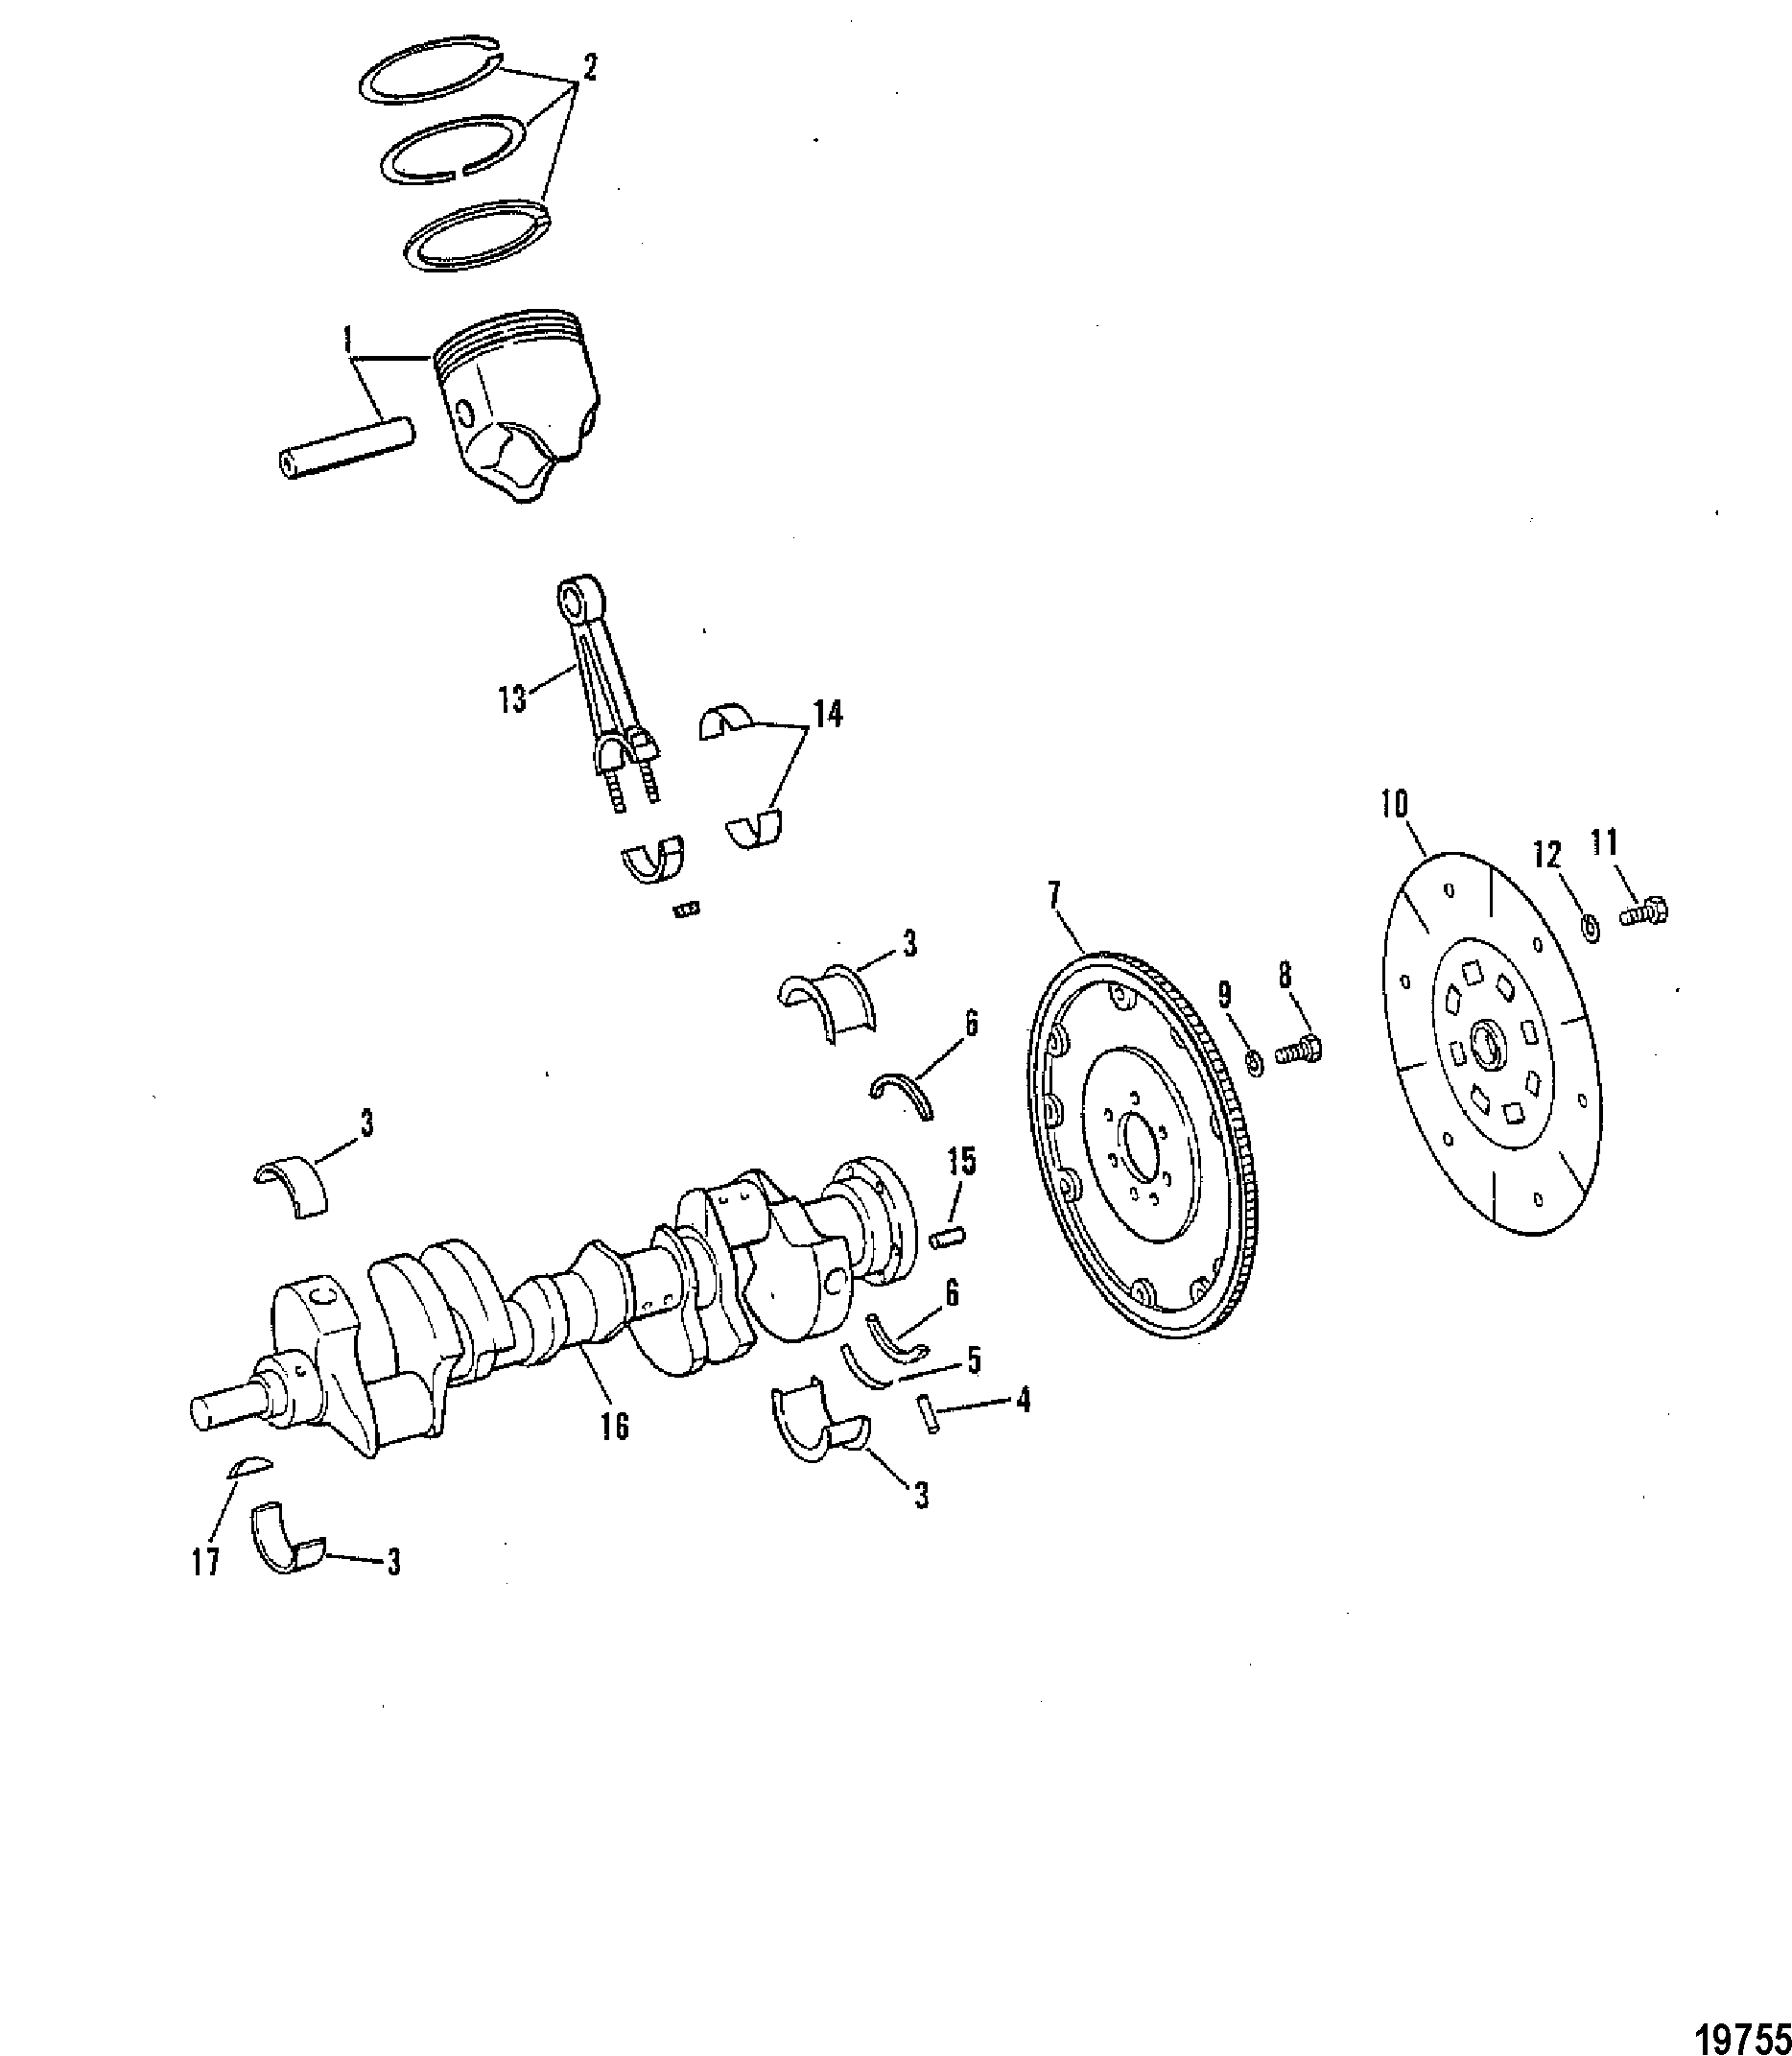 Crankshaft, Pistons and Connecting Rods(460)